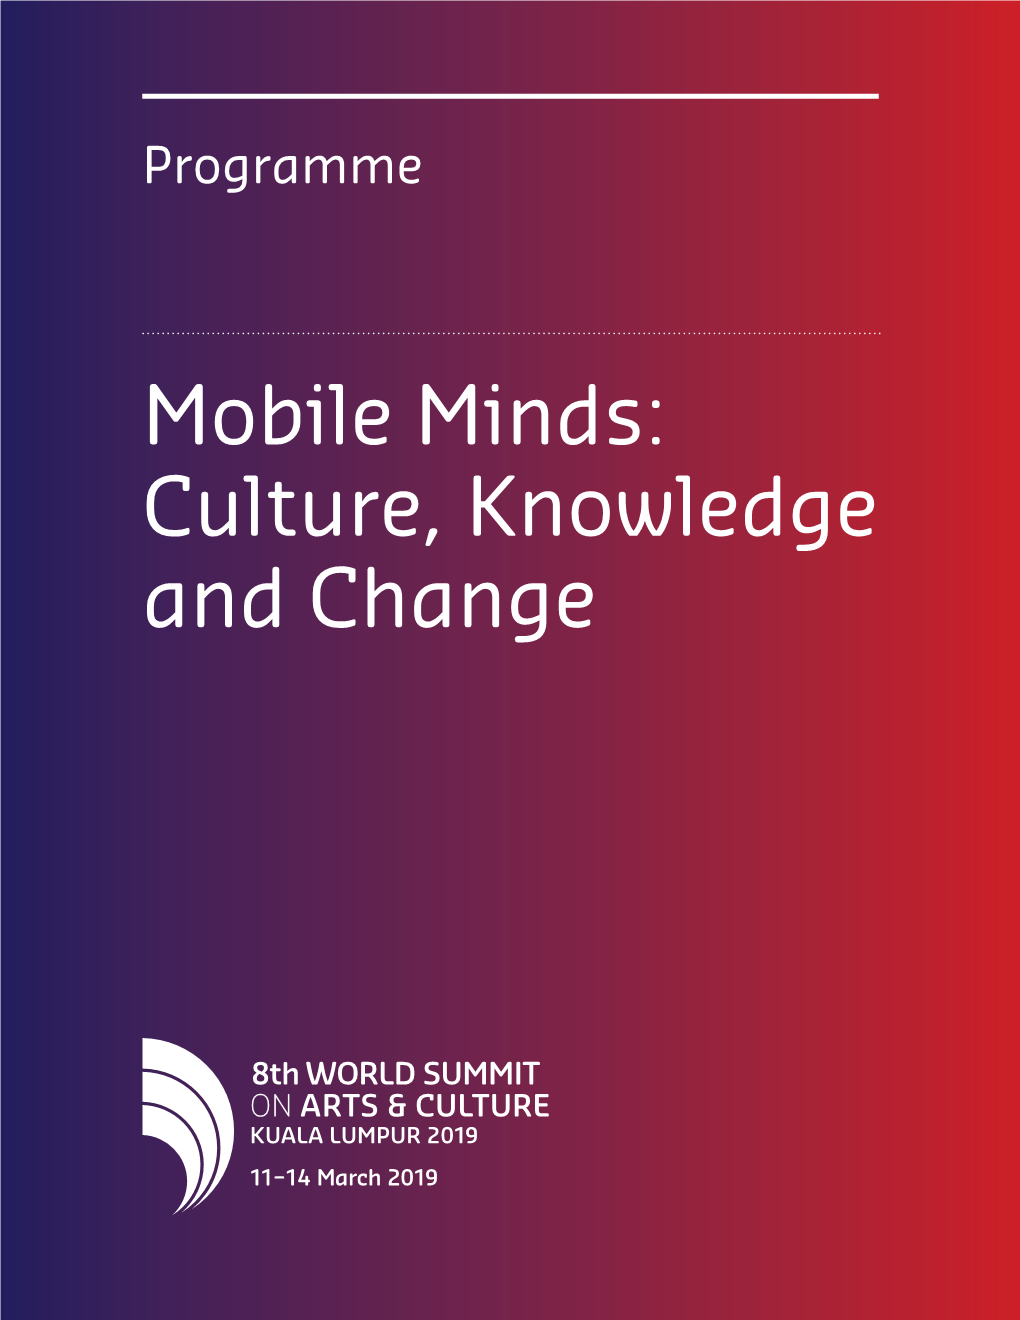 Mobile Minds: Culture, Knowledge and Change Programme